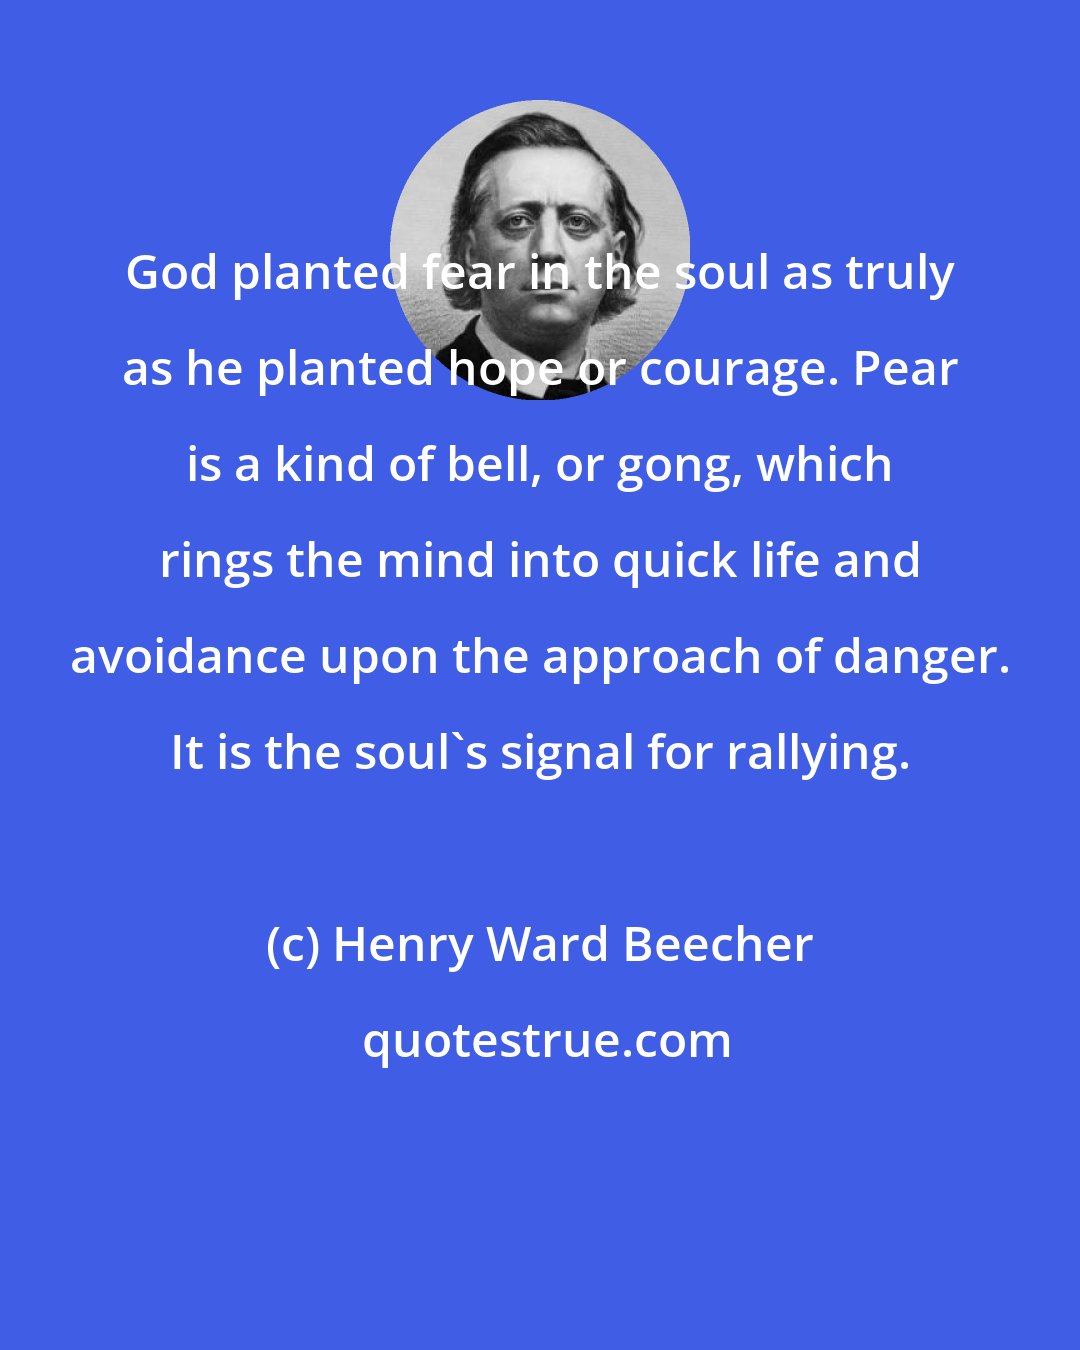 Henry Ward Beecher: God planted fear in the soul as truly as he planted hope or courage. Pear is a kind of bell, or gong, which rings the mind into quick life and avoidance upon the approach of danger. It is the soul's signal for rallying.